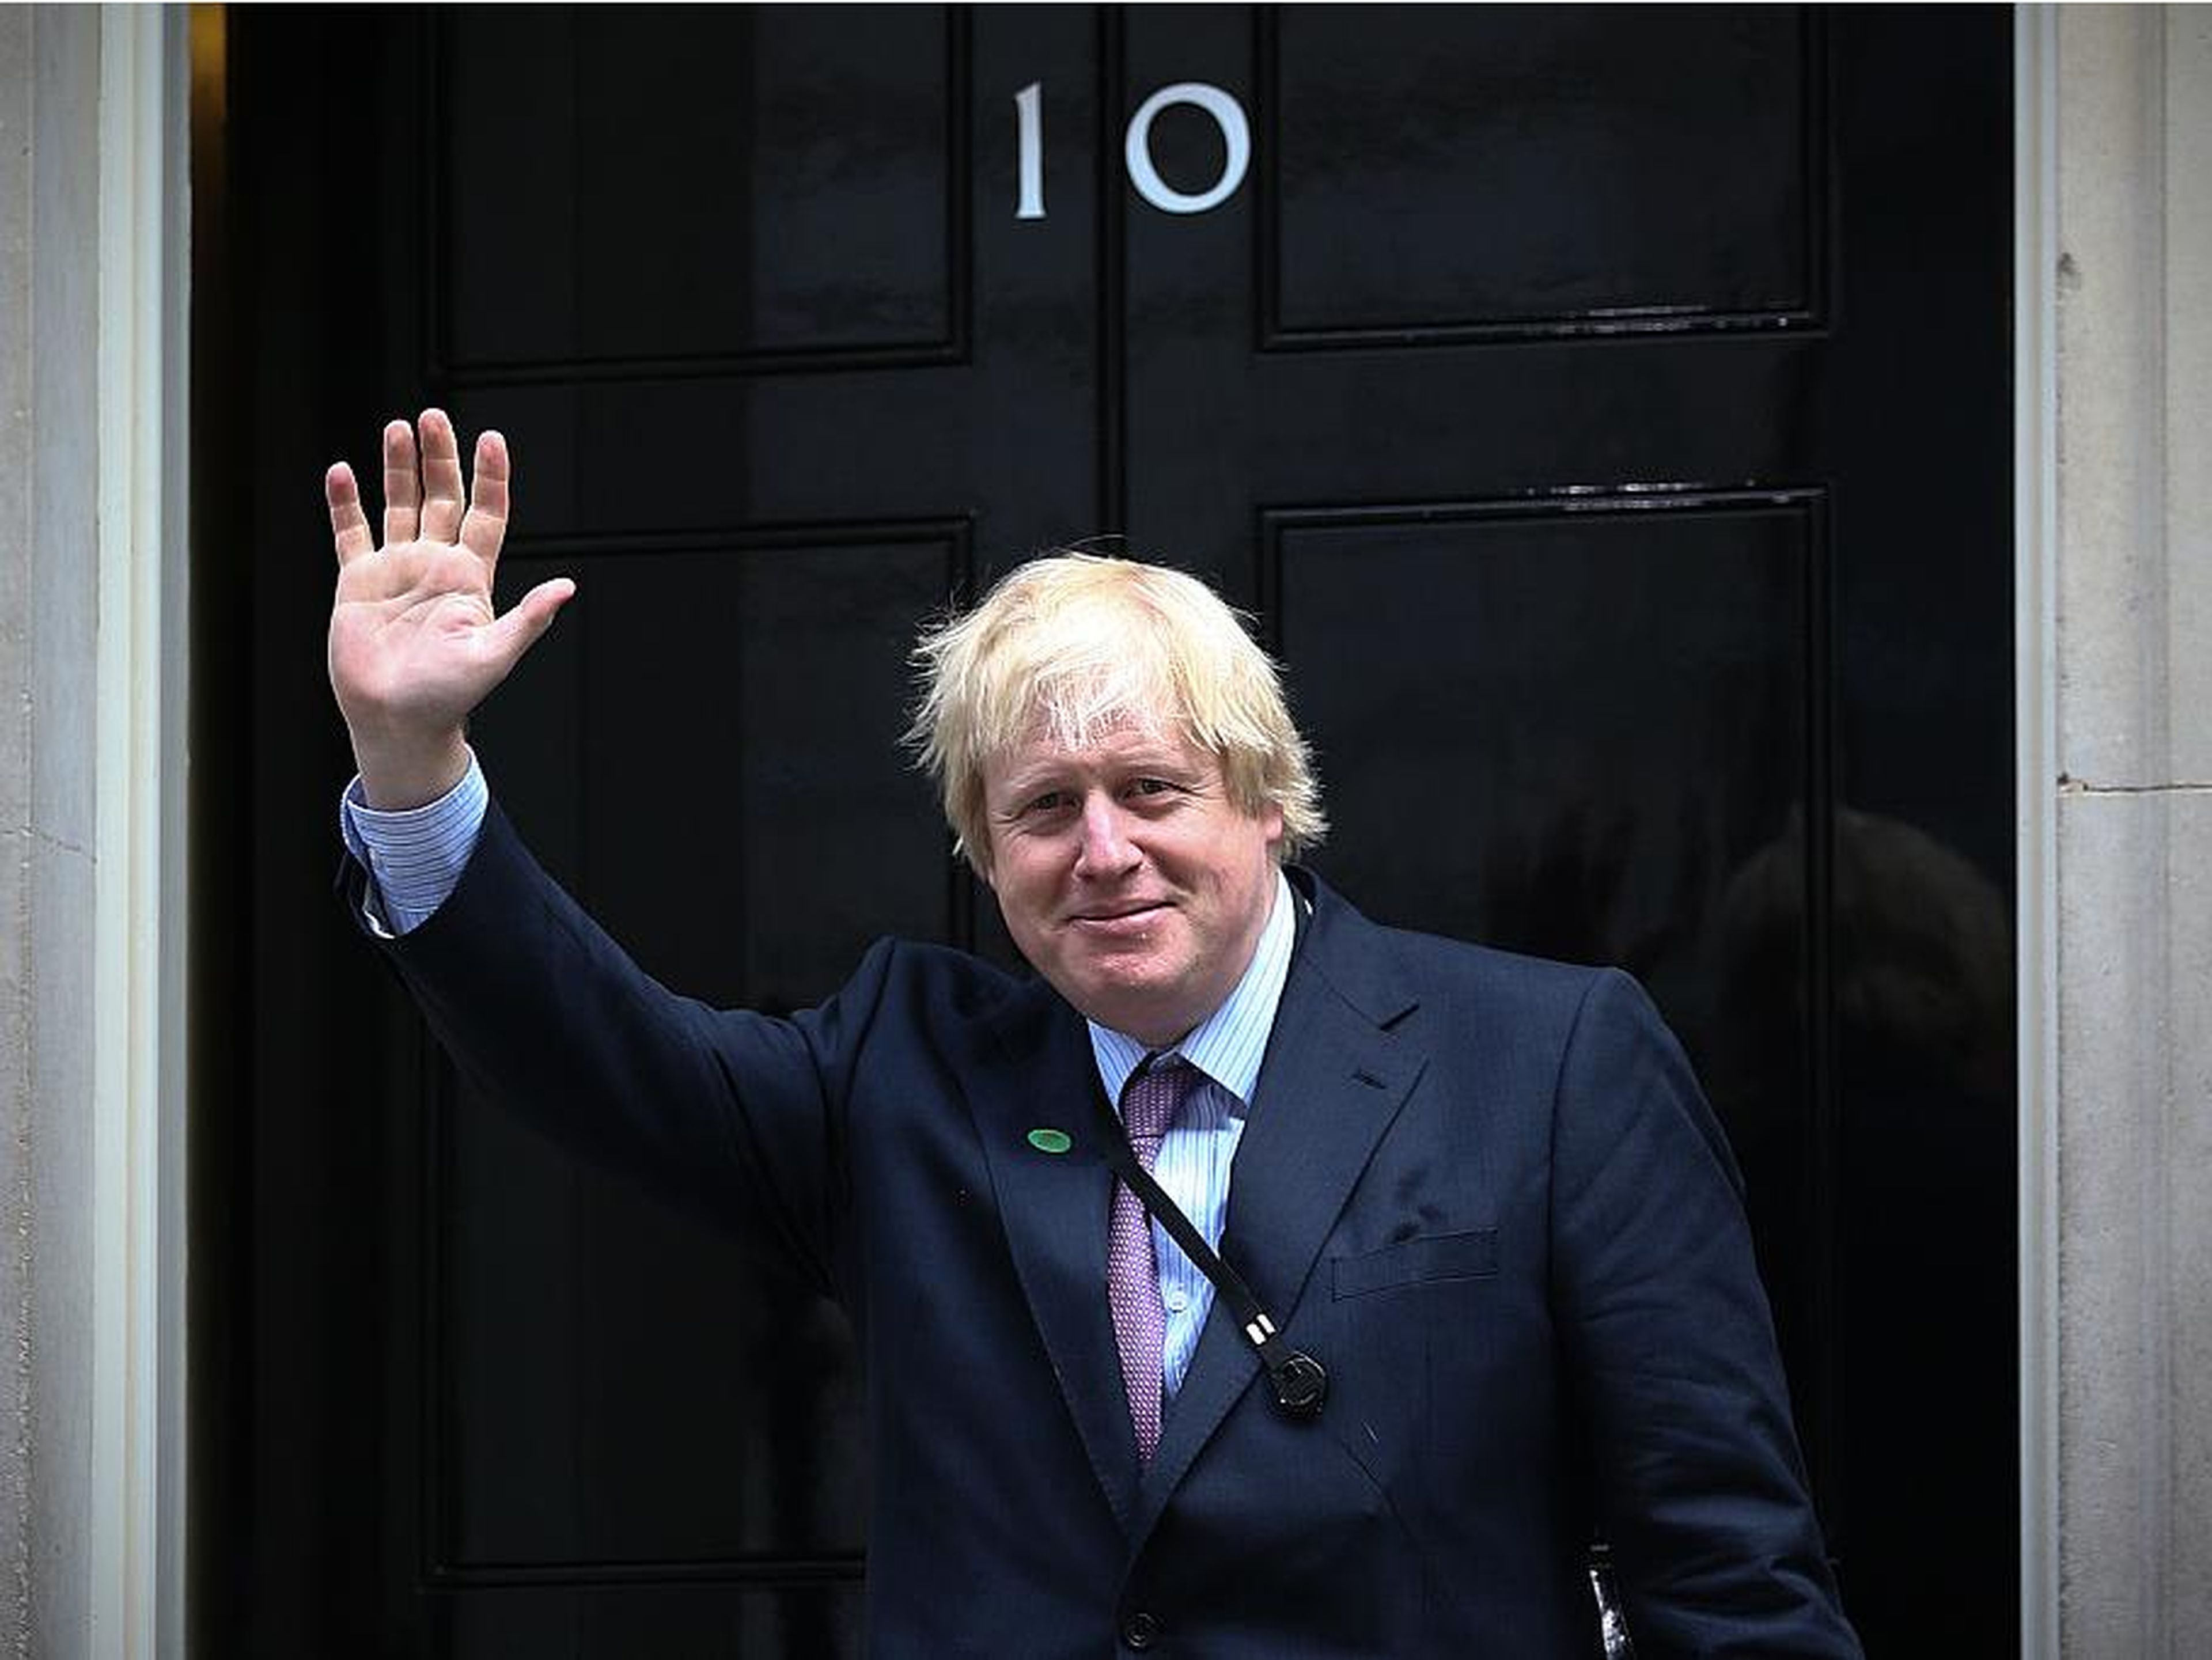 Johnson enters Downing Street as prime minister for the first time